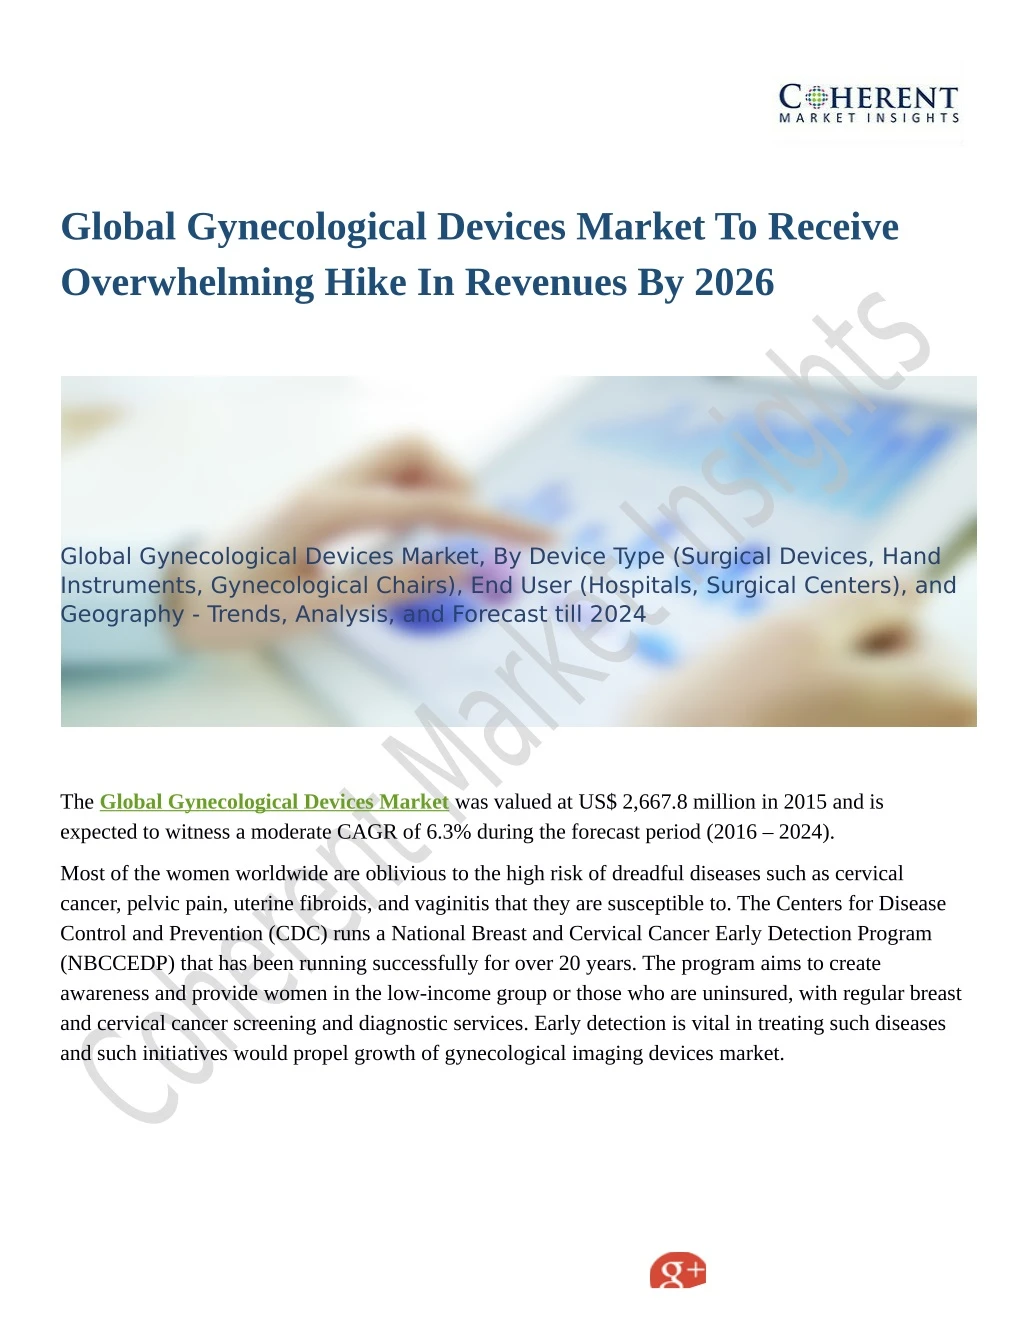 global gynecological devices market to receive